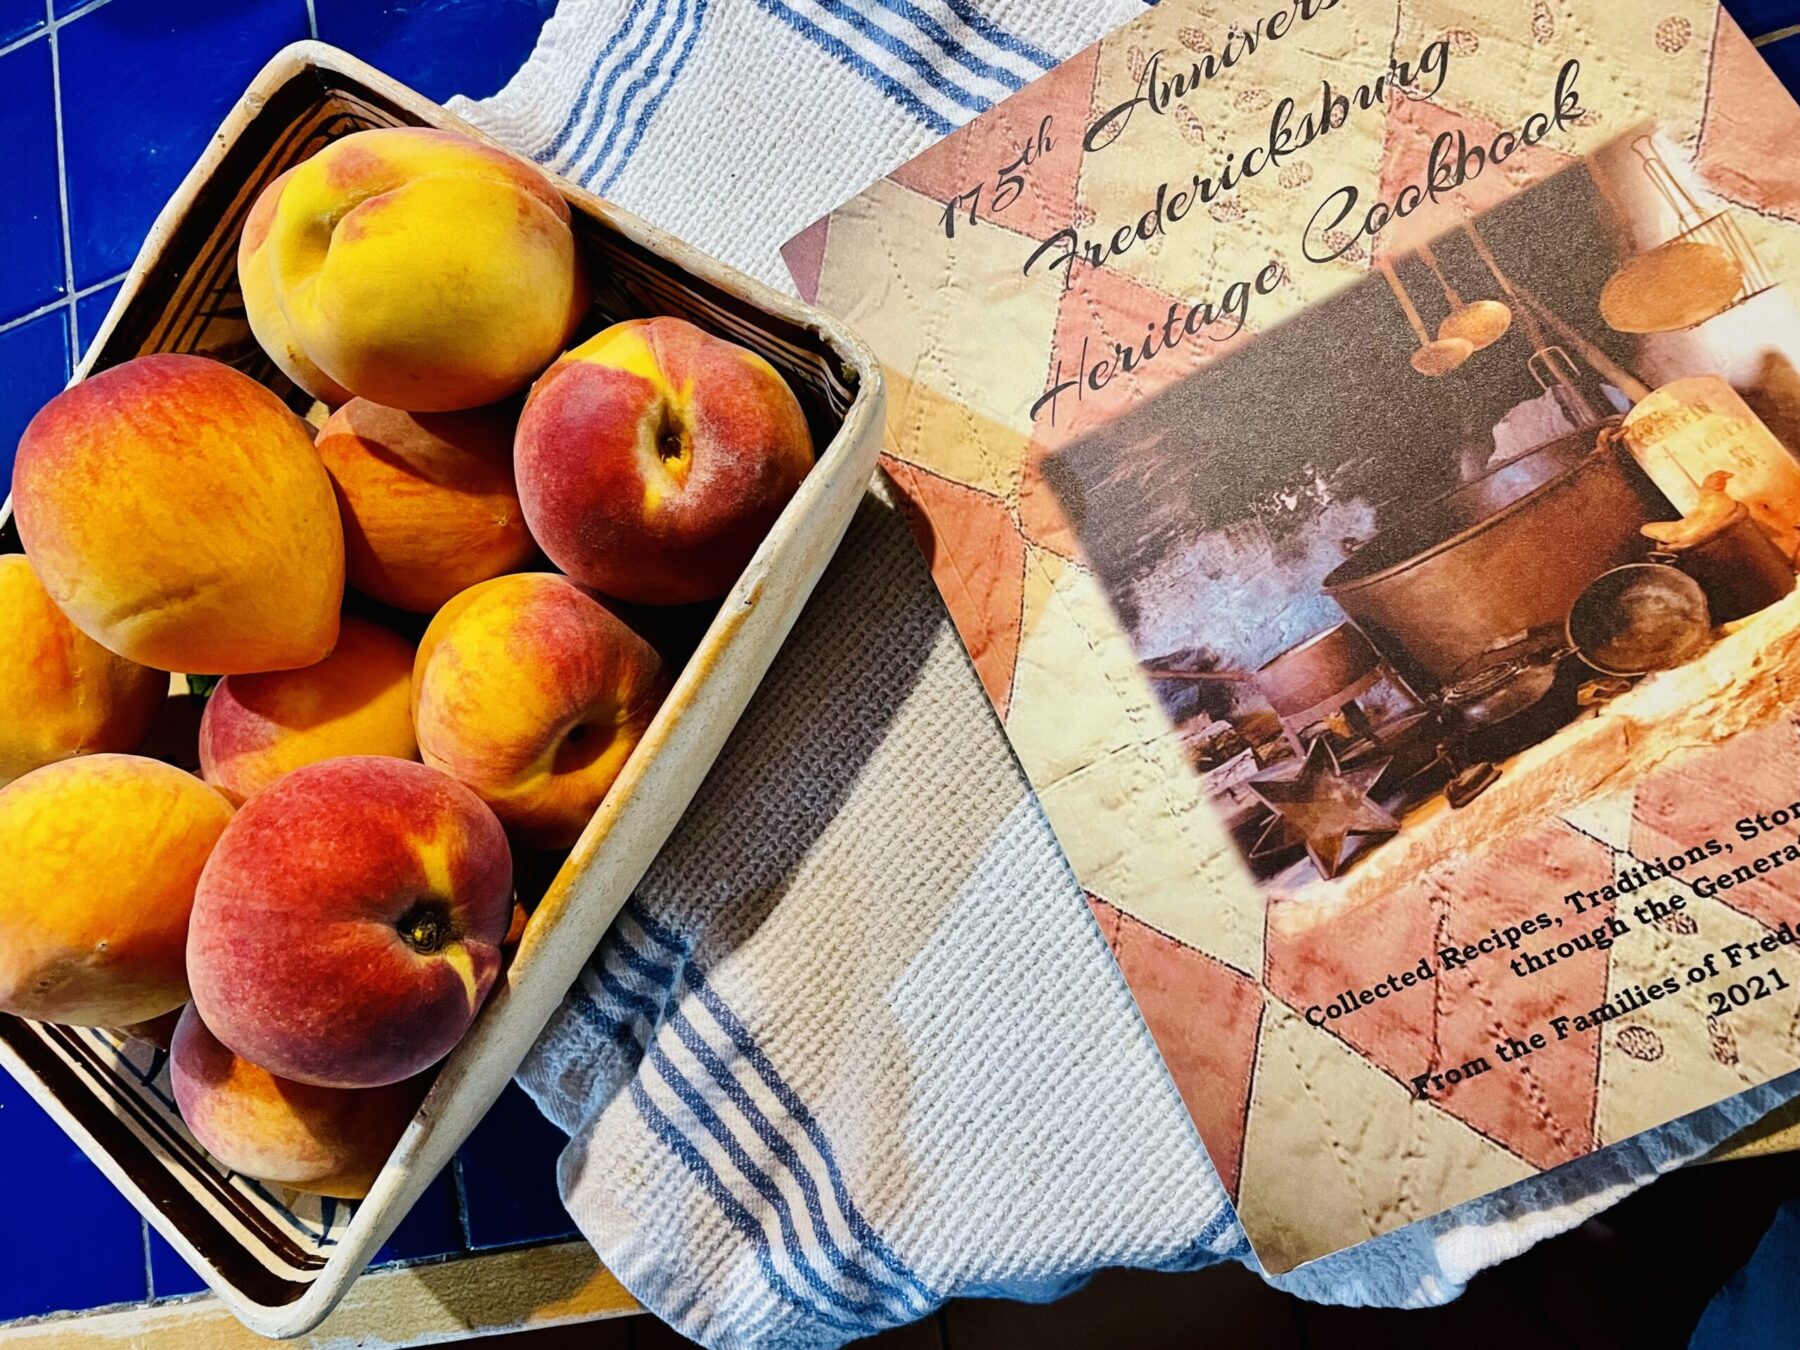 cookbook and peaches on a napkin on the table